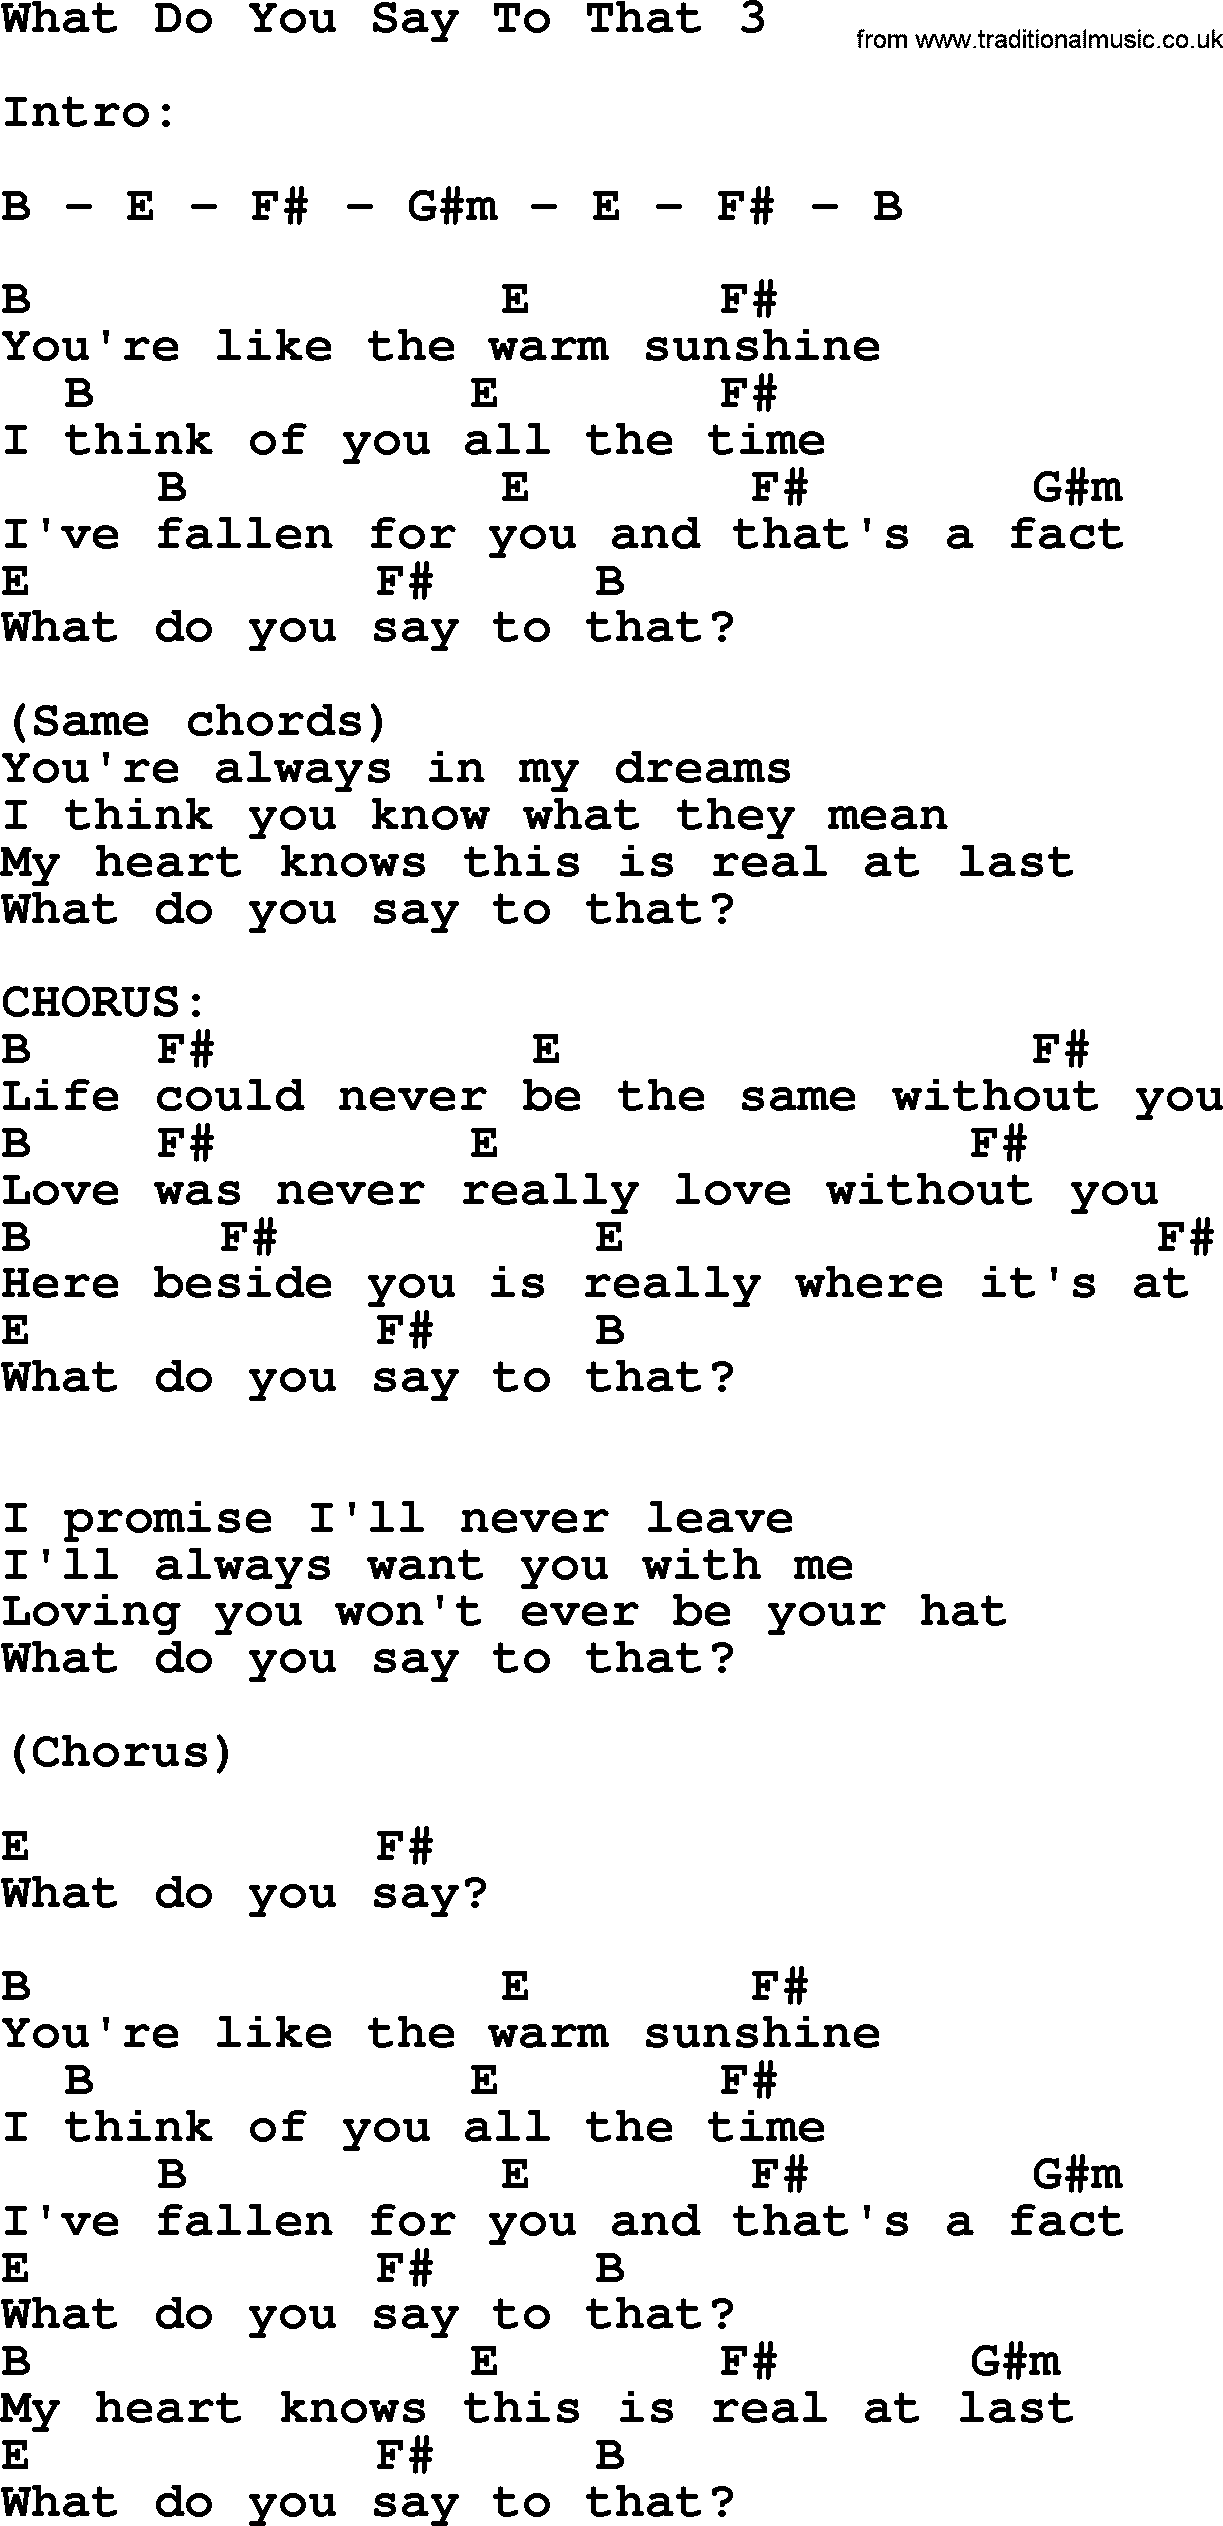 George Strait song: What Do You Say To That 3, lyrics and chords